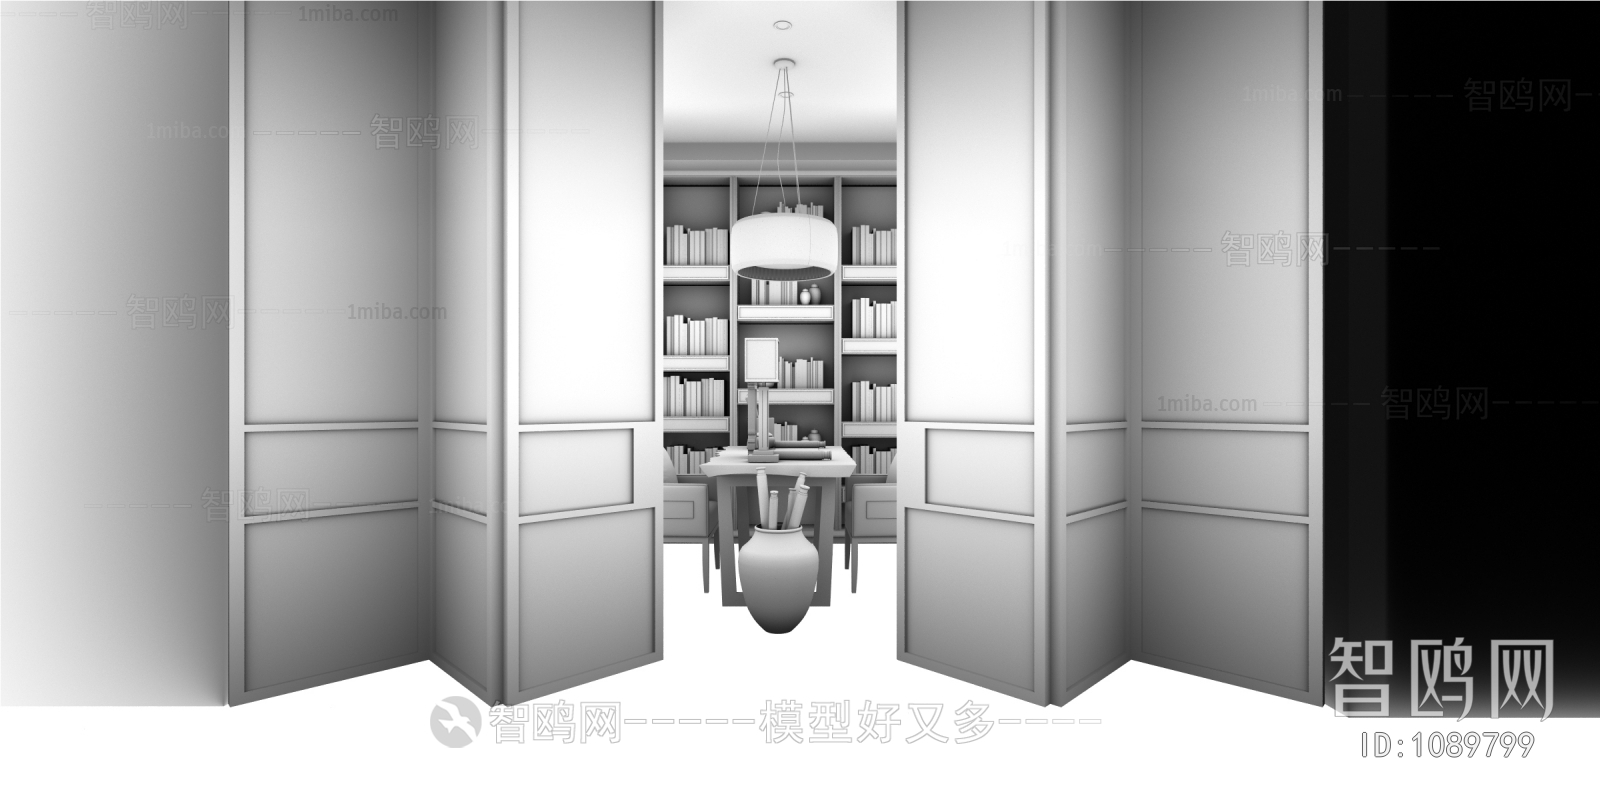 New Chinese Style Library